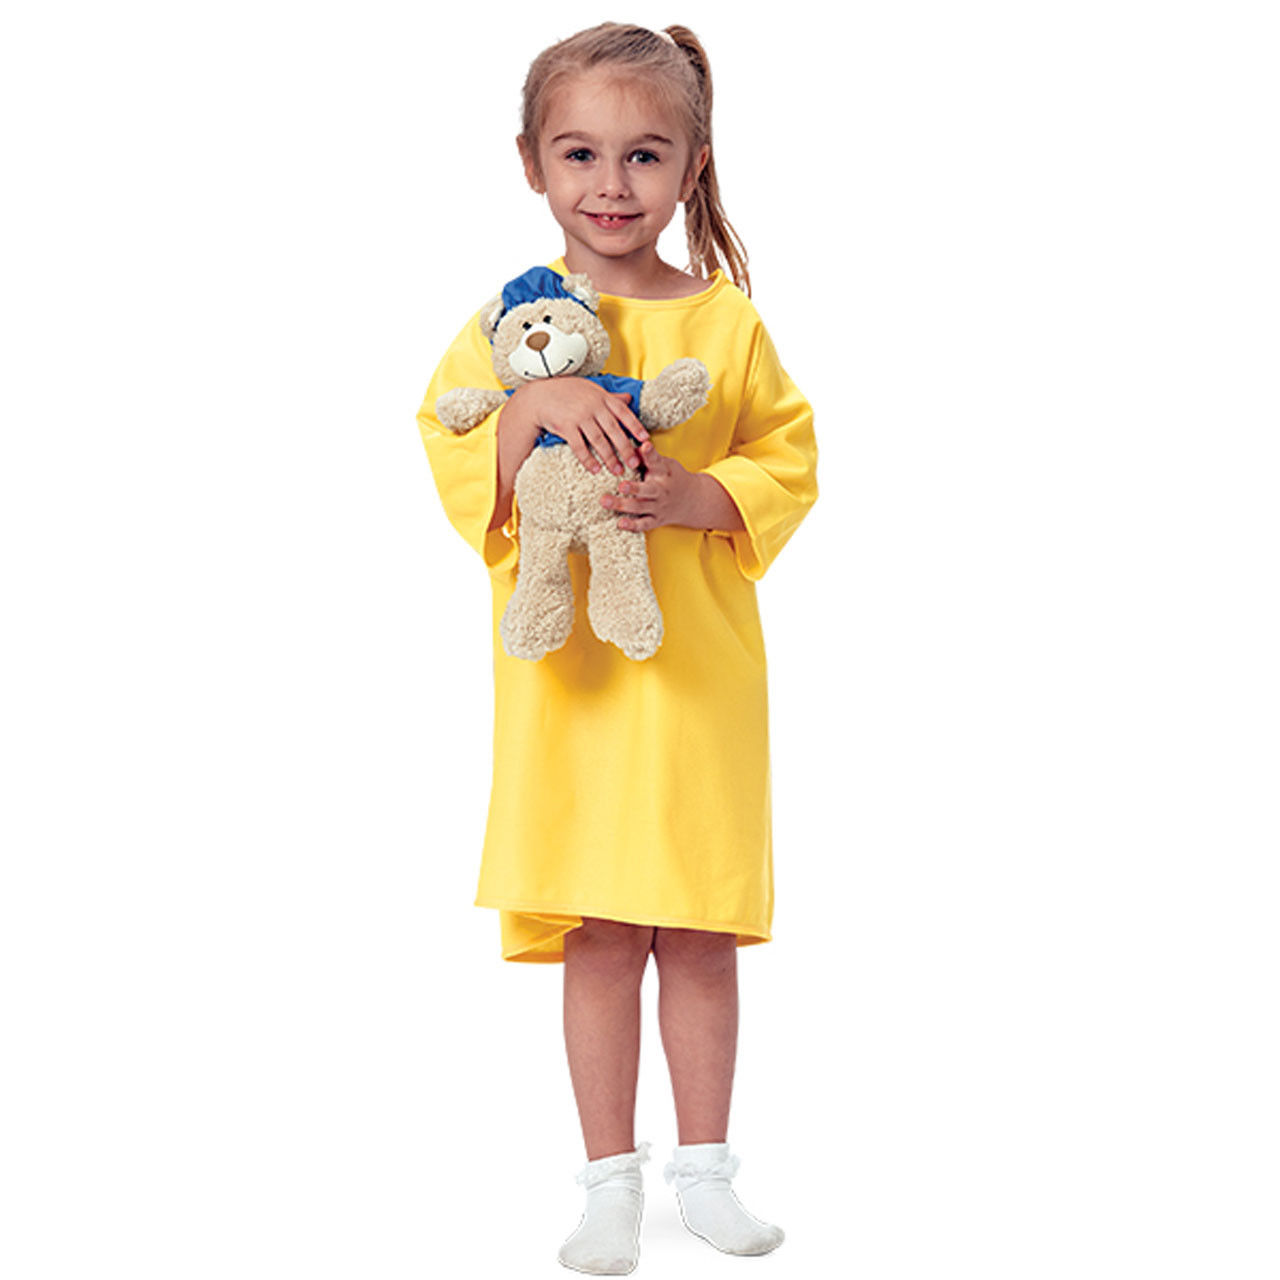 Can I buy these pediatric gowns in bulk for a kids hospital?